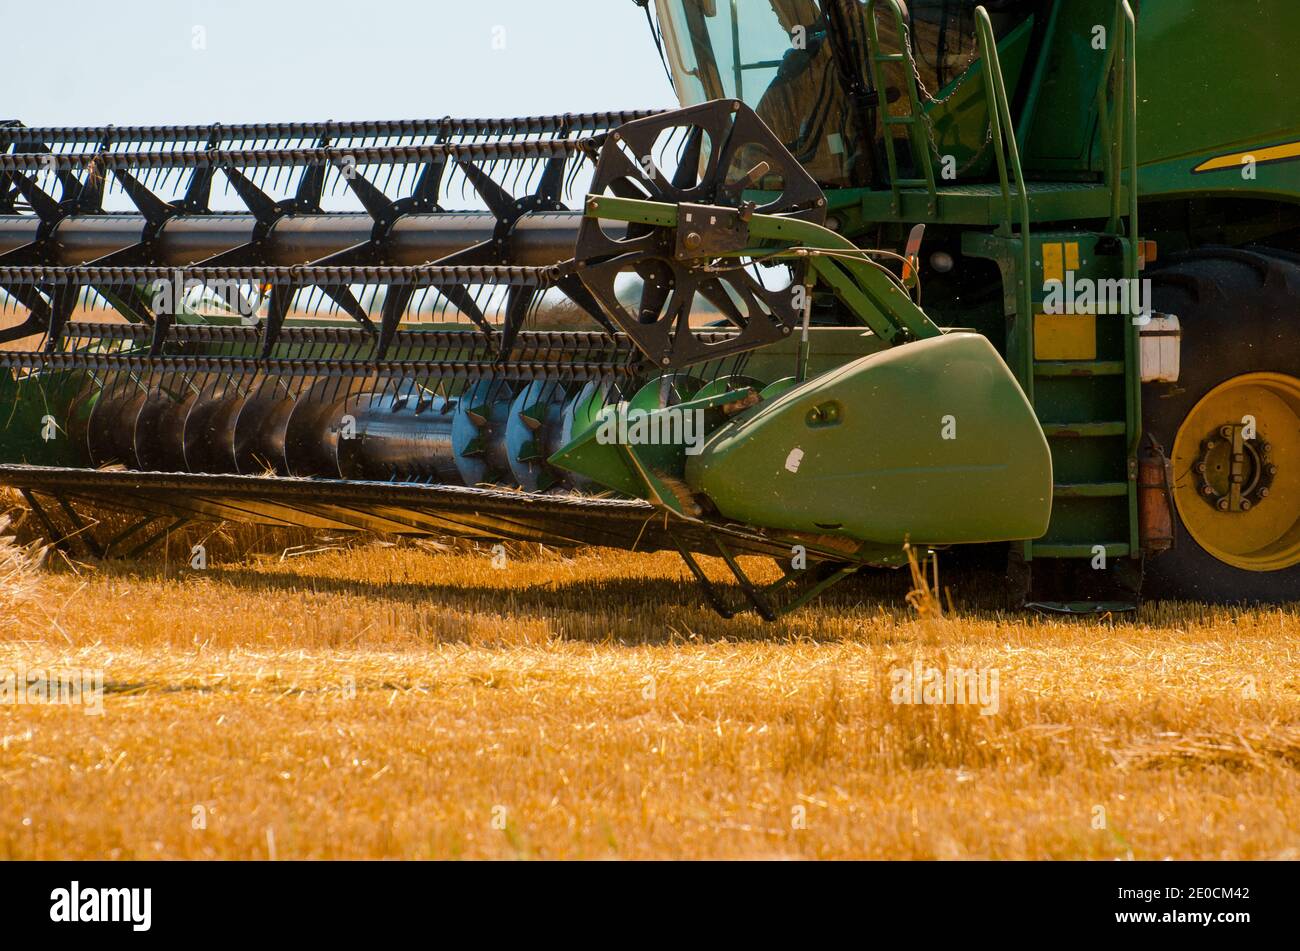 Agricultural machinery collects yellow wheat crop in open field on a sunny bright day Stock Photo